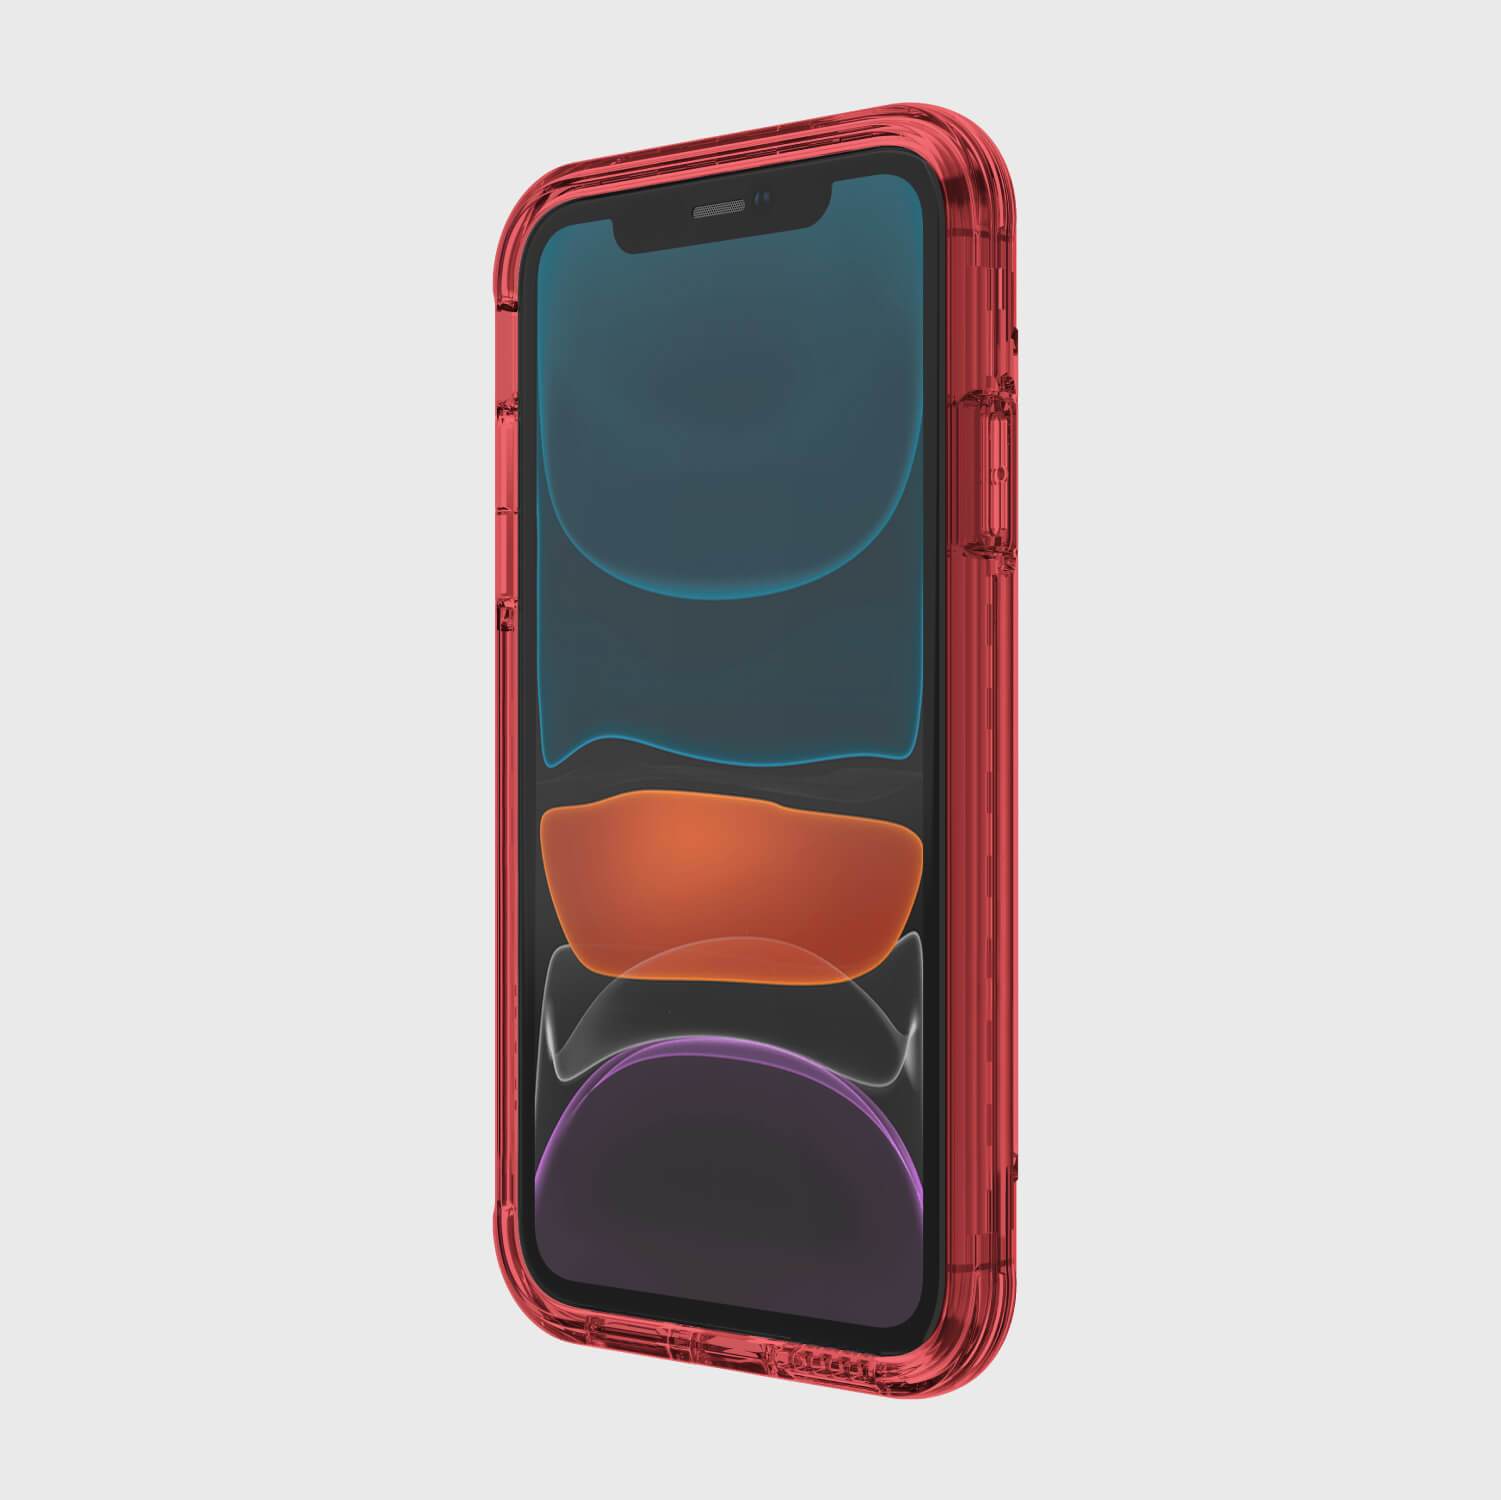 The back of a Raptic iPhone 11 Case - AIR in red with wireless charging capability.